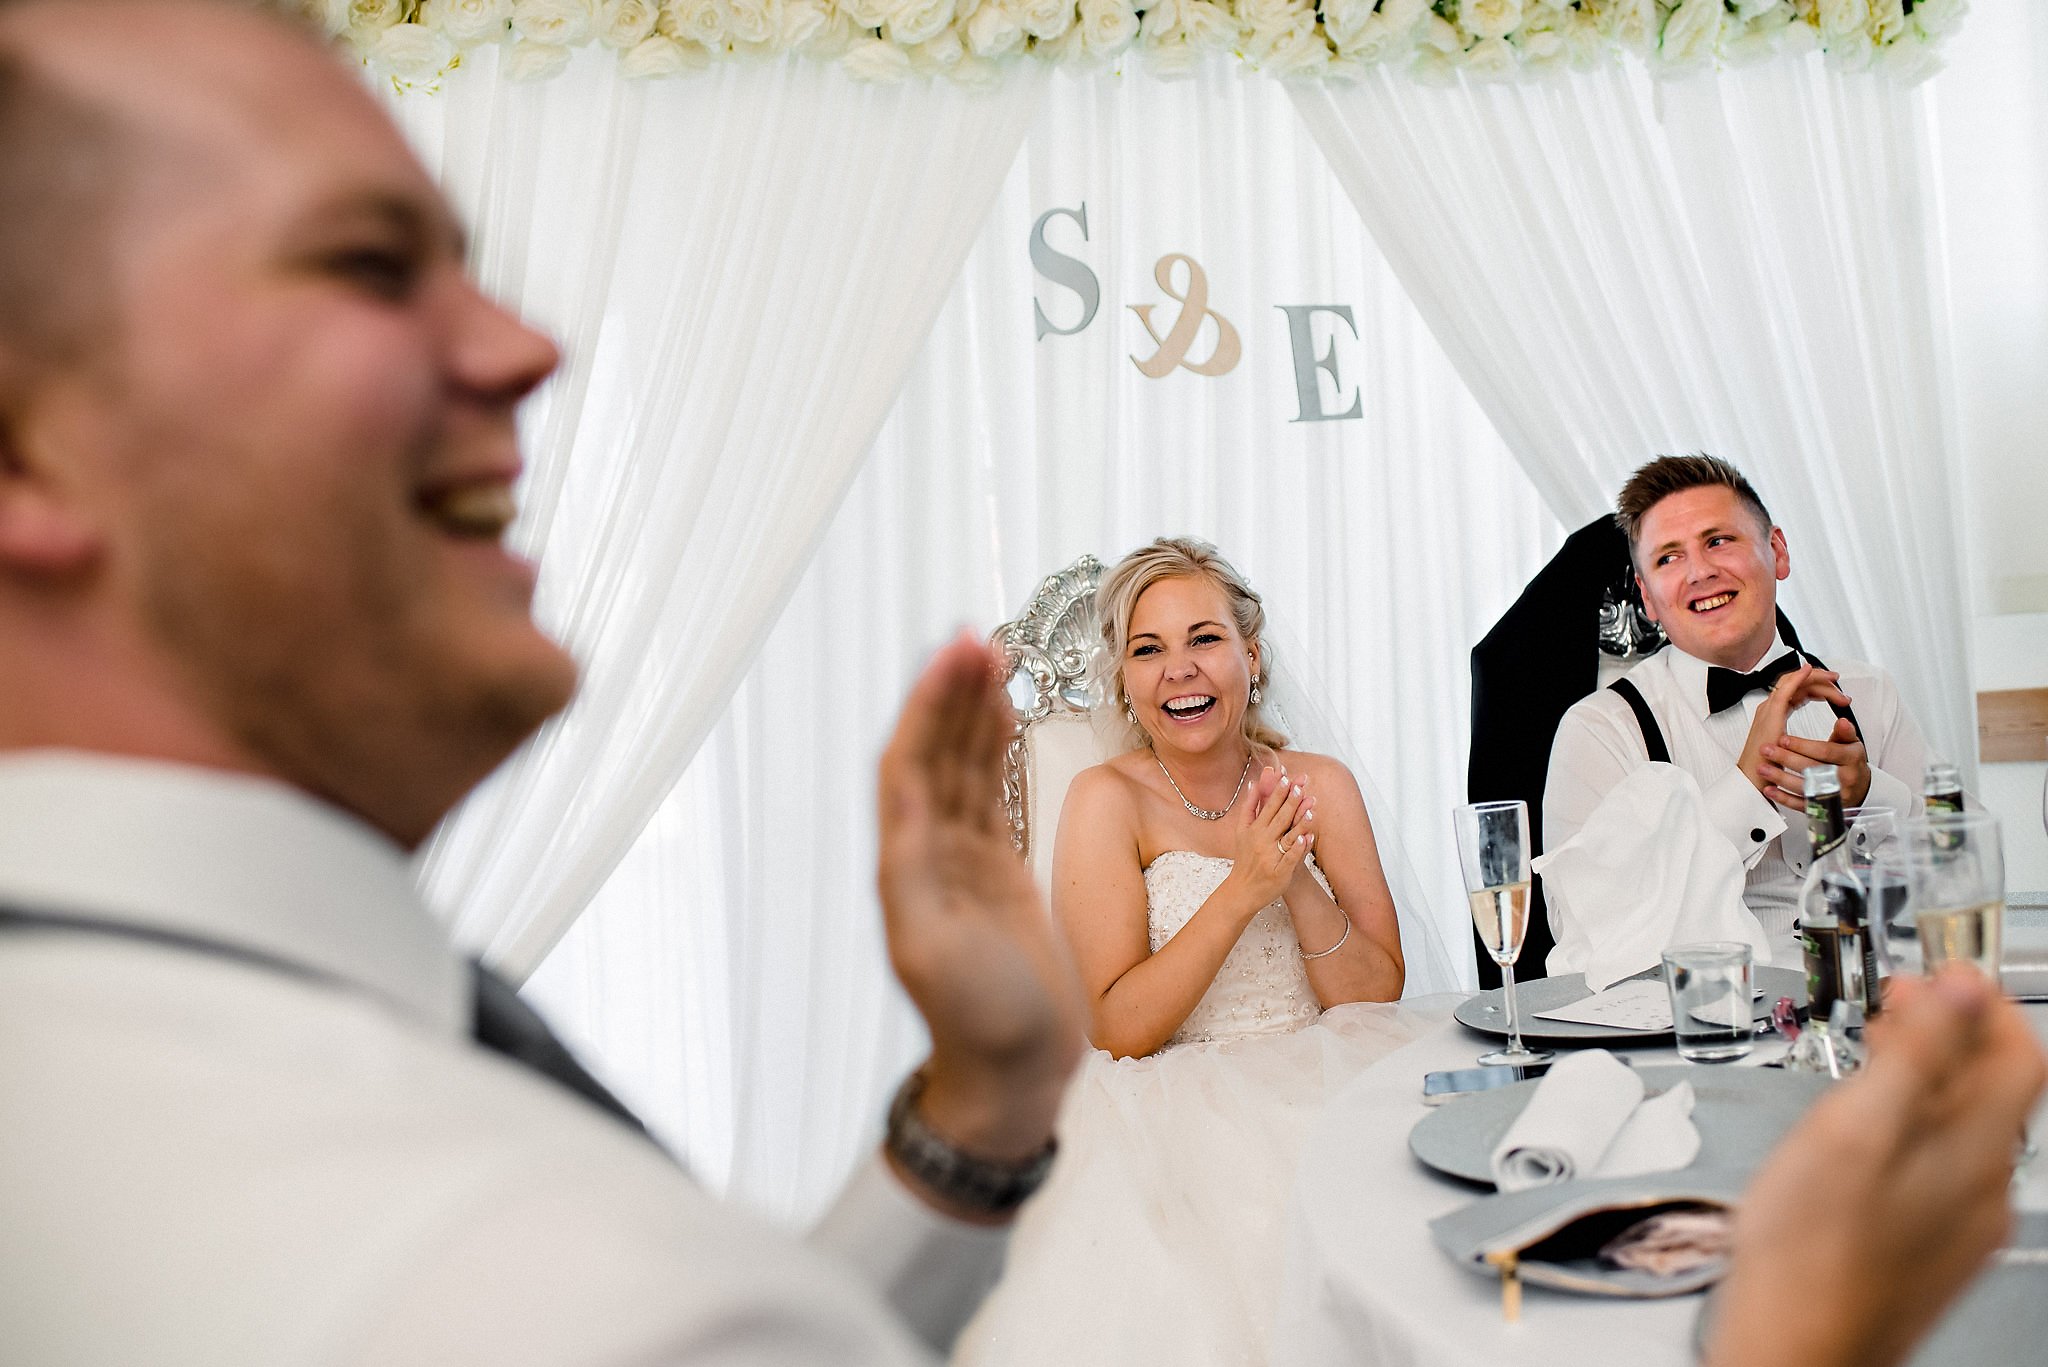 Bride and groom having fun during speeches during their wedding reception in Stavanger, Norway